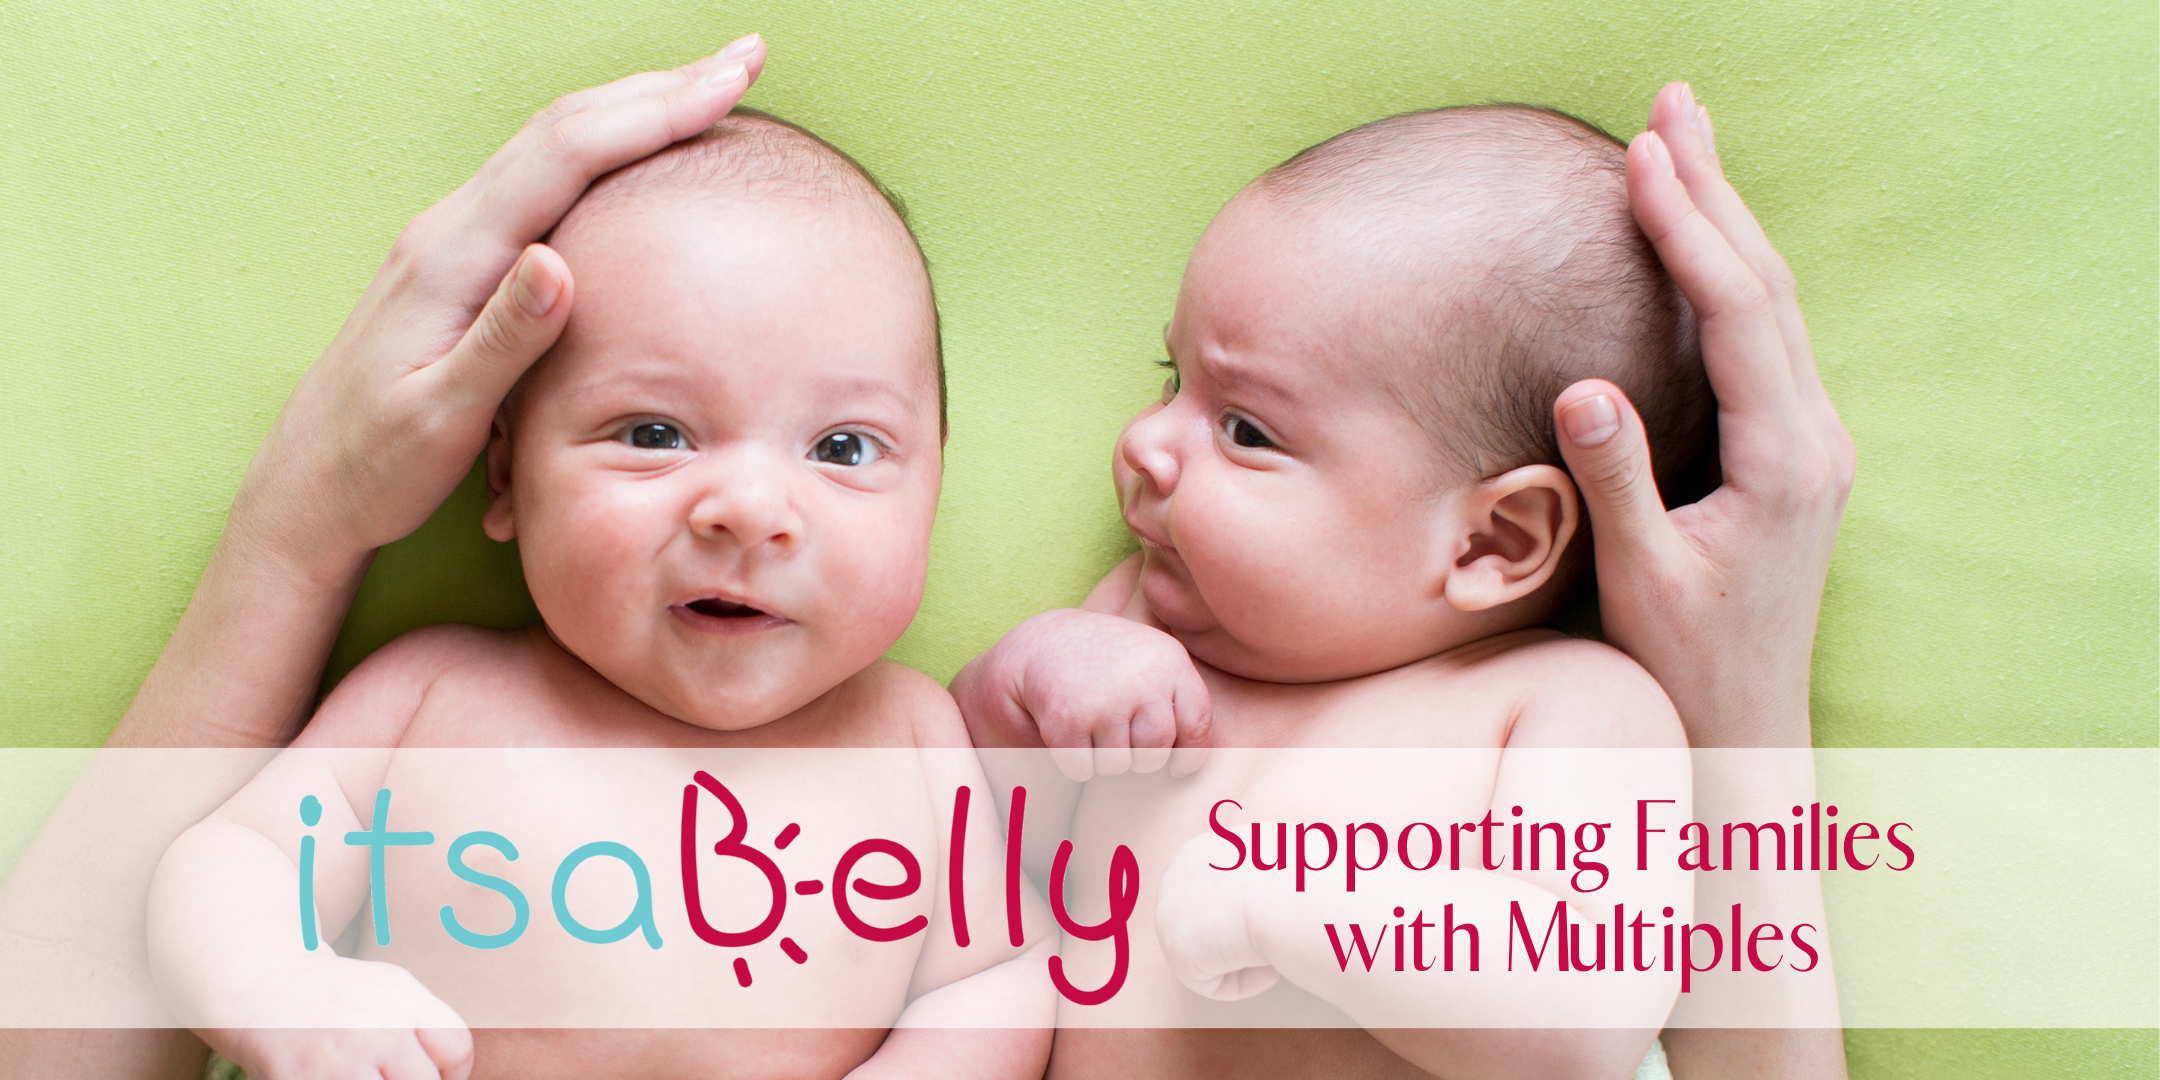 Graphic for Supporting Families with Mulpitples